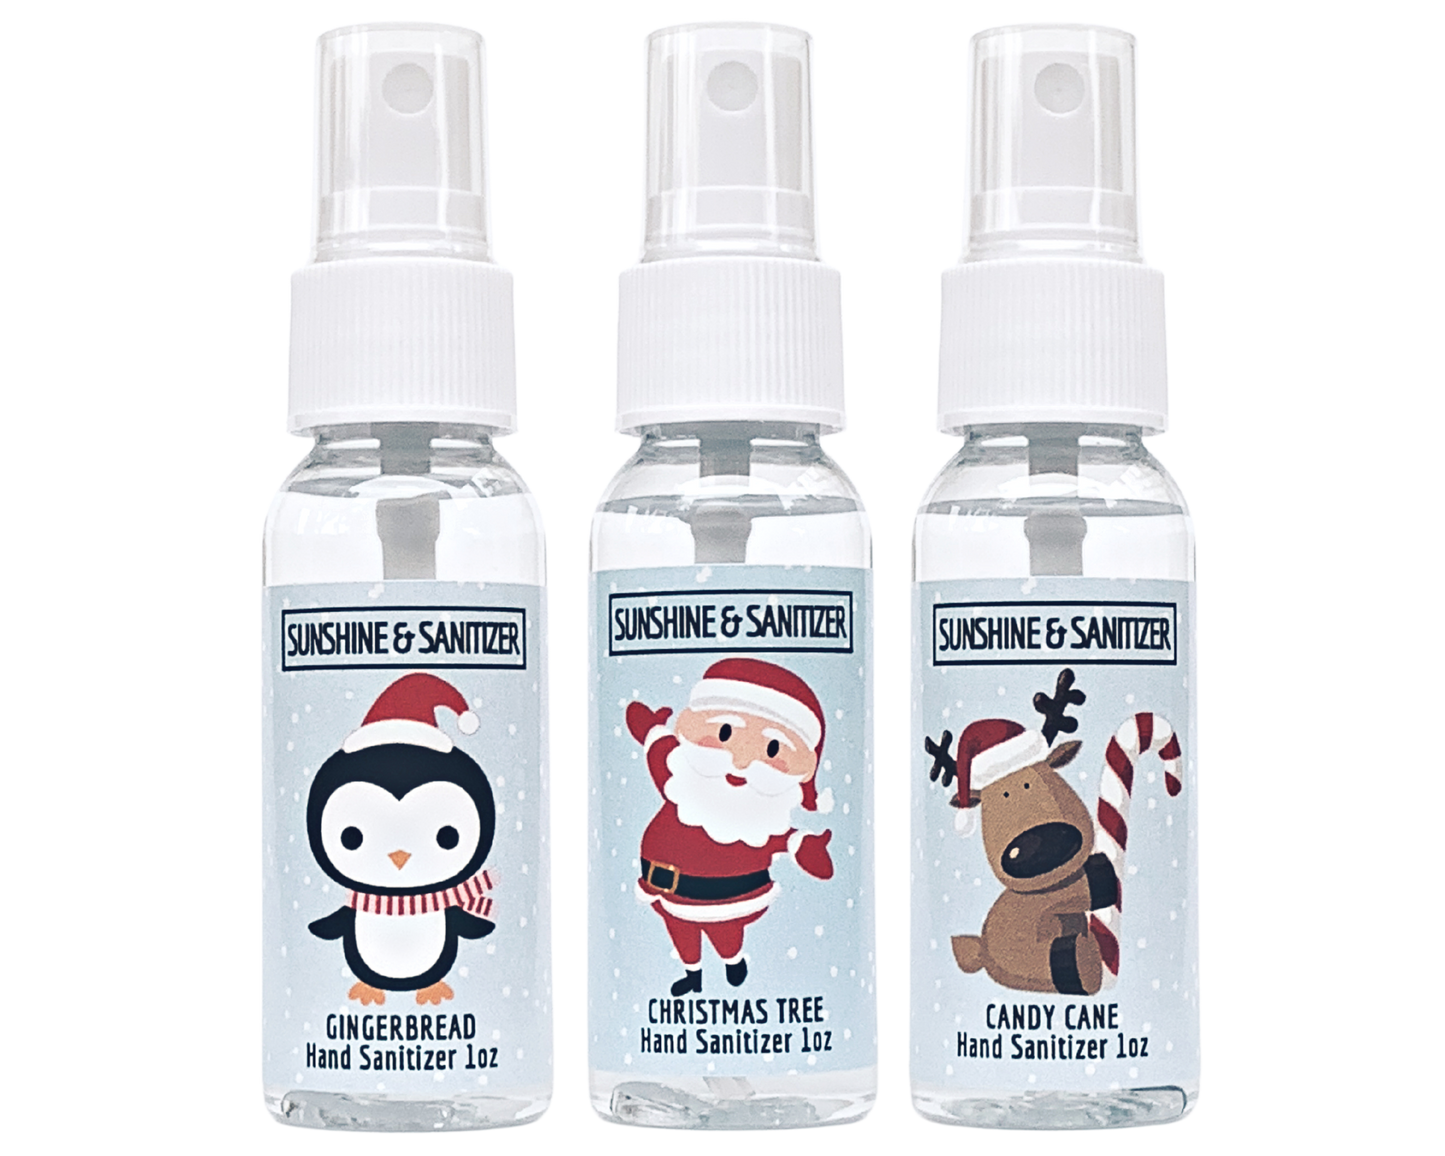 Christmas Hand Sanitizer 3 Pack: Christmas Tree, Gingerbread, Candy Cane - with Aloe & Essential Oils by Sunshine & Sanitizer